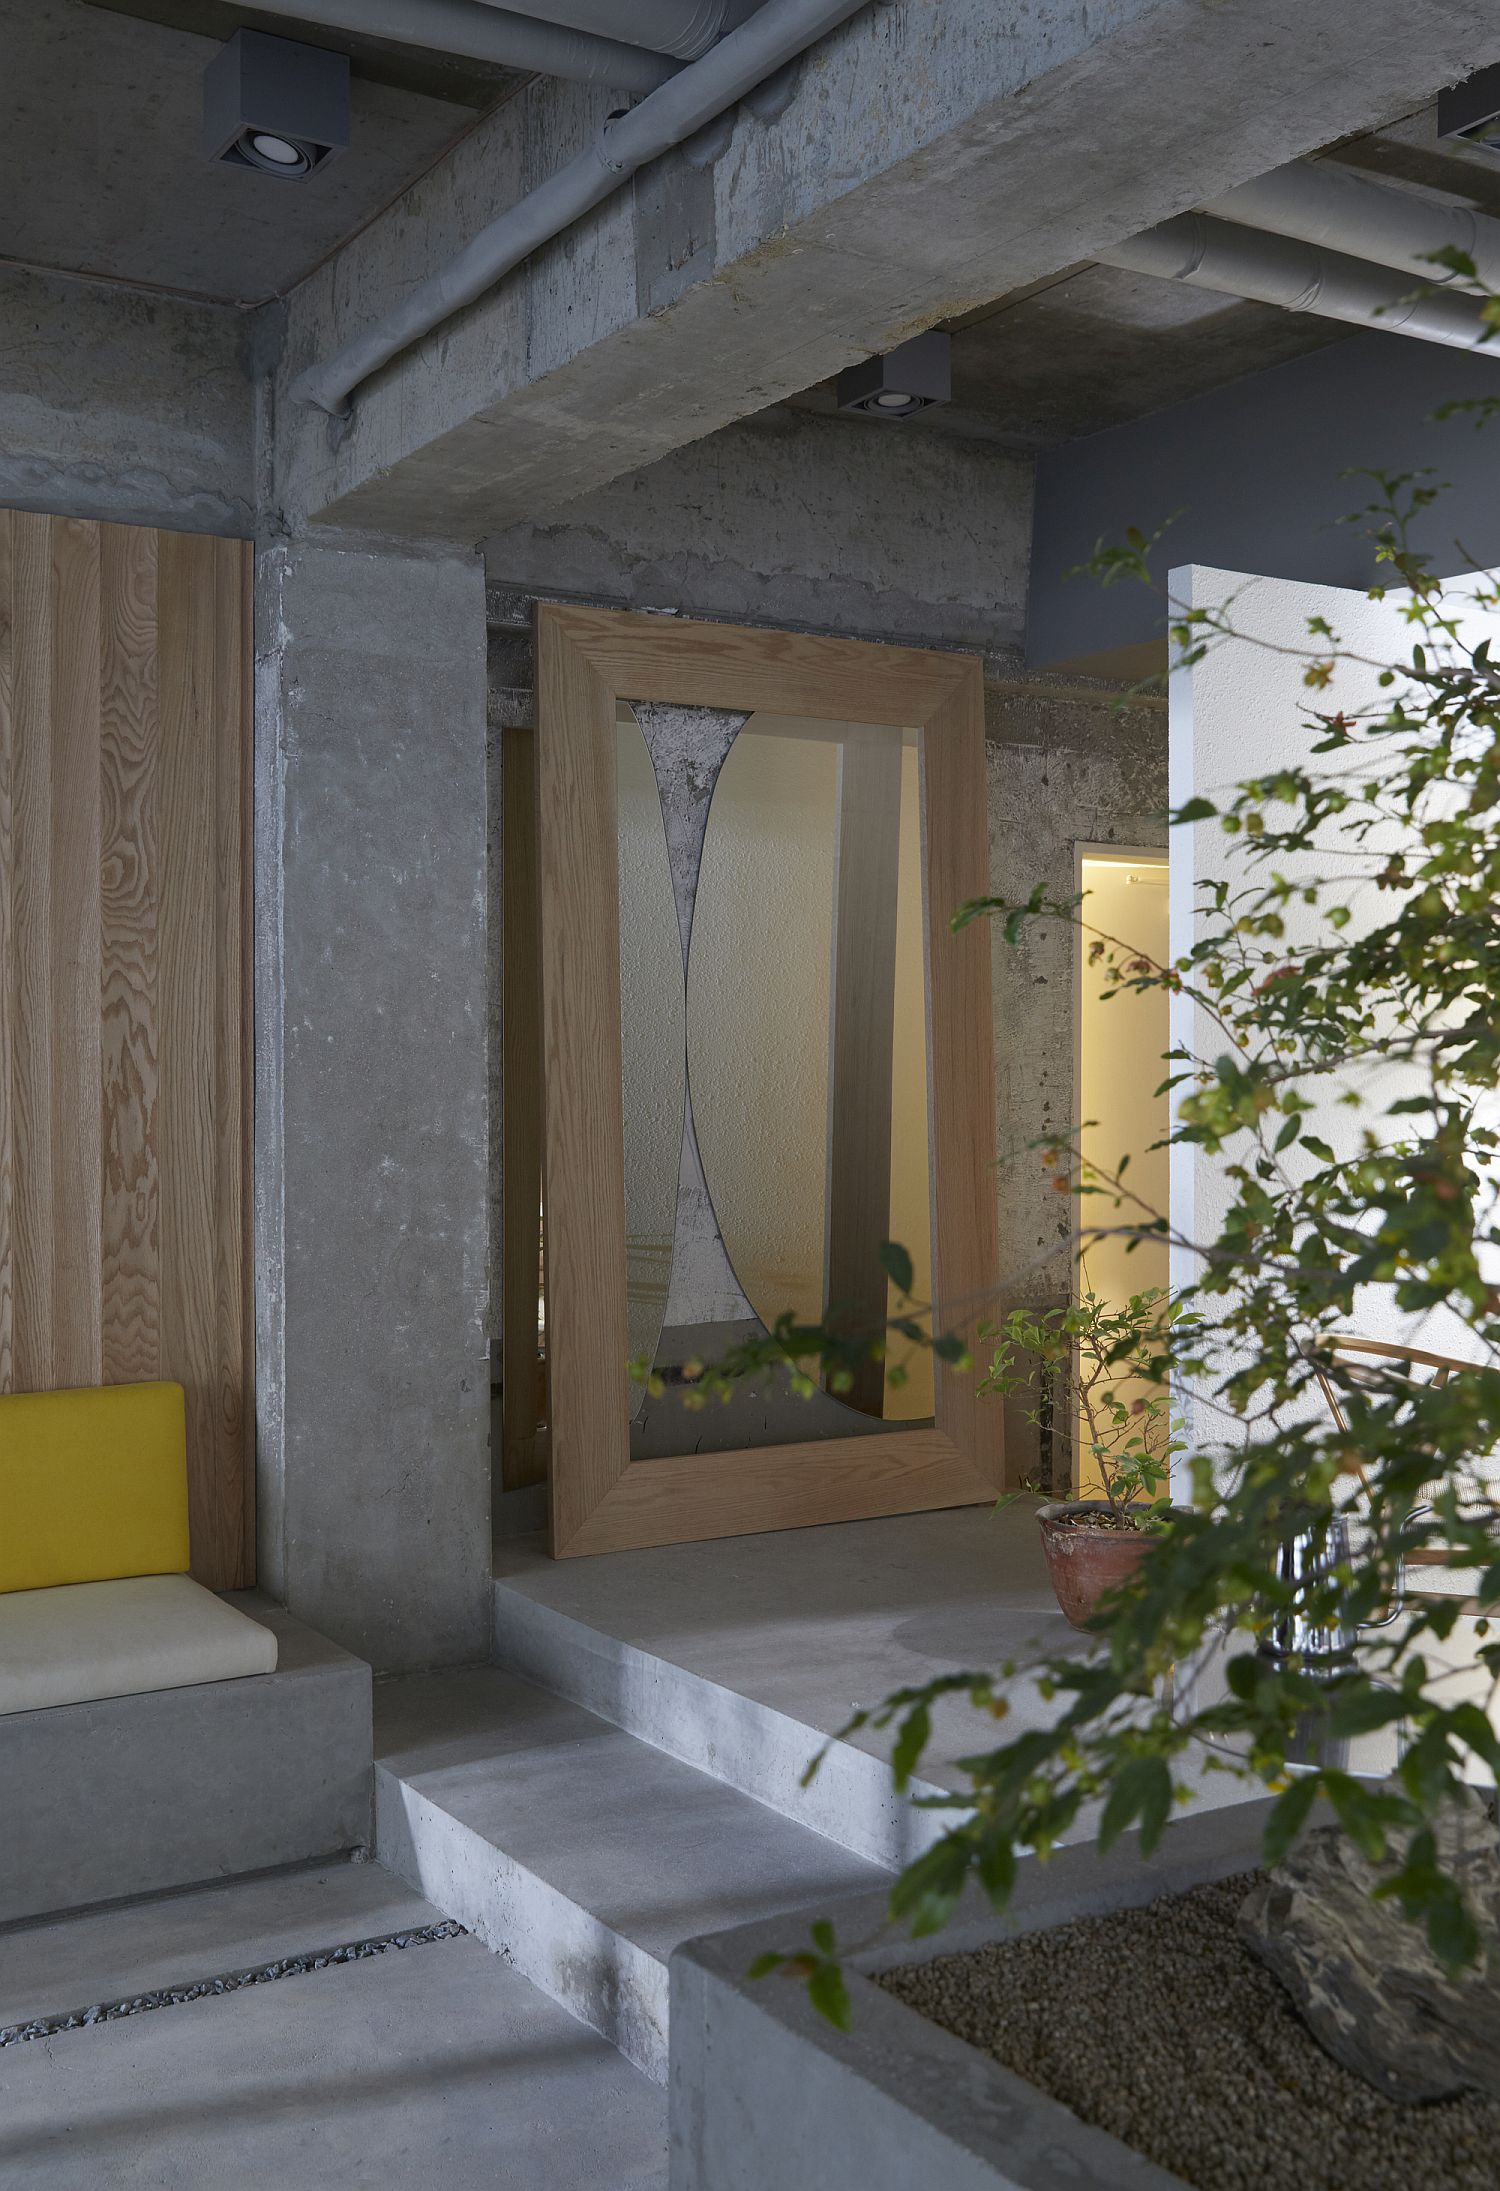 Natural-materials-and-exposed-concrete-provide-a-balance-between-cold-and-warm-elements